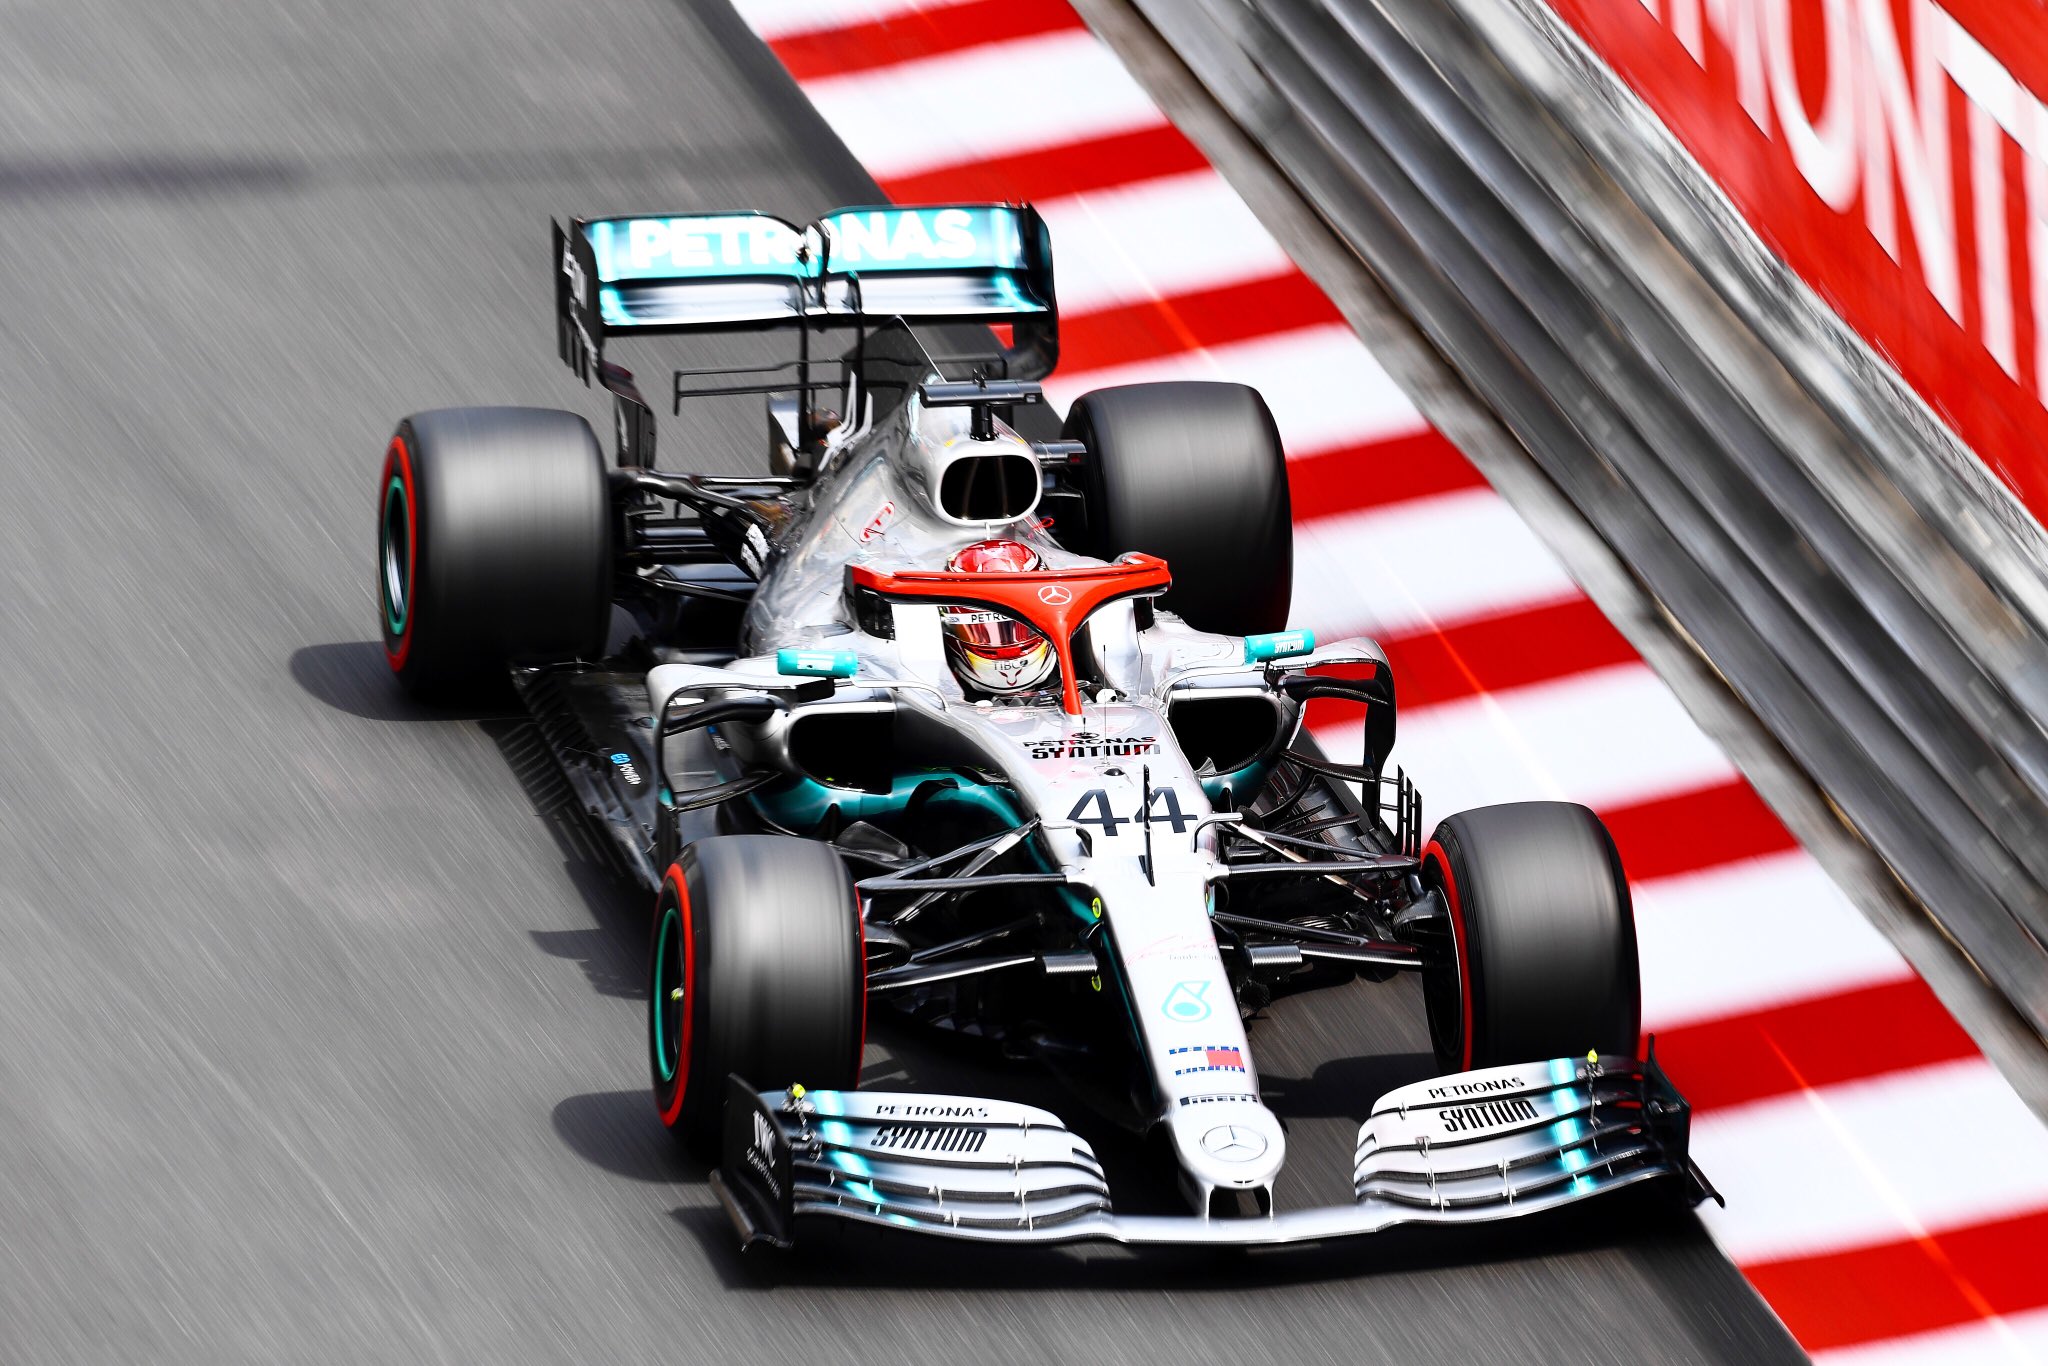 f1 special edition livery: Mercedes